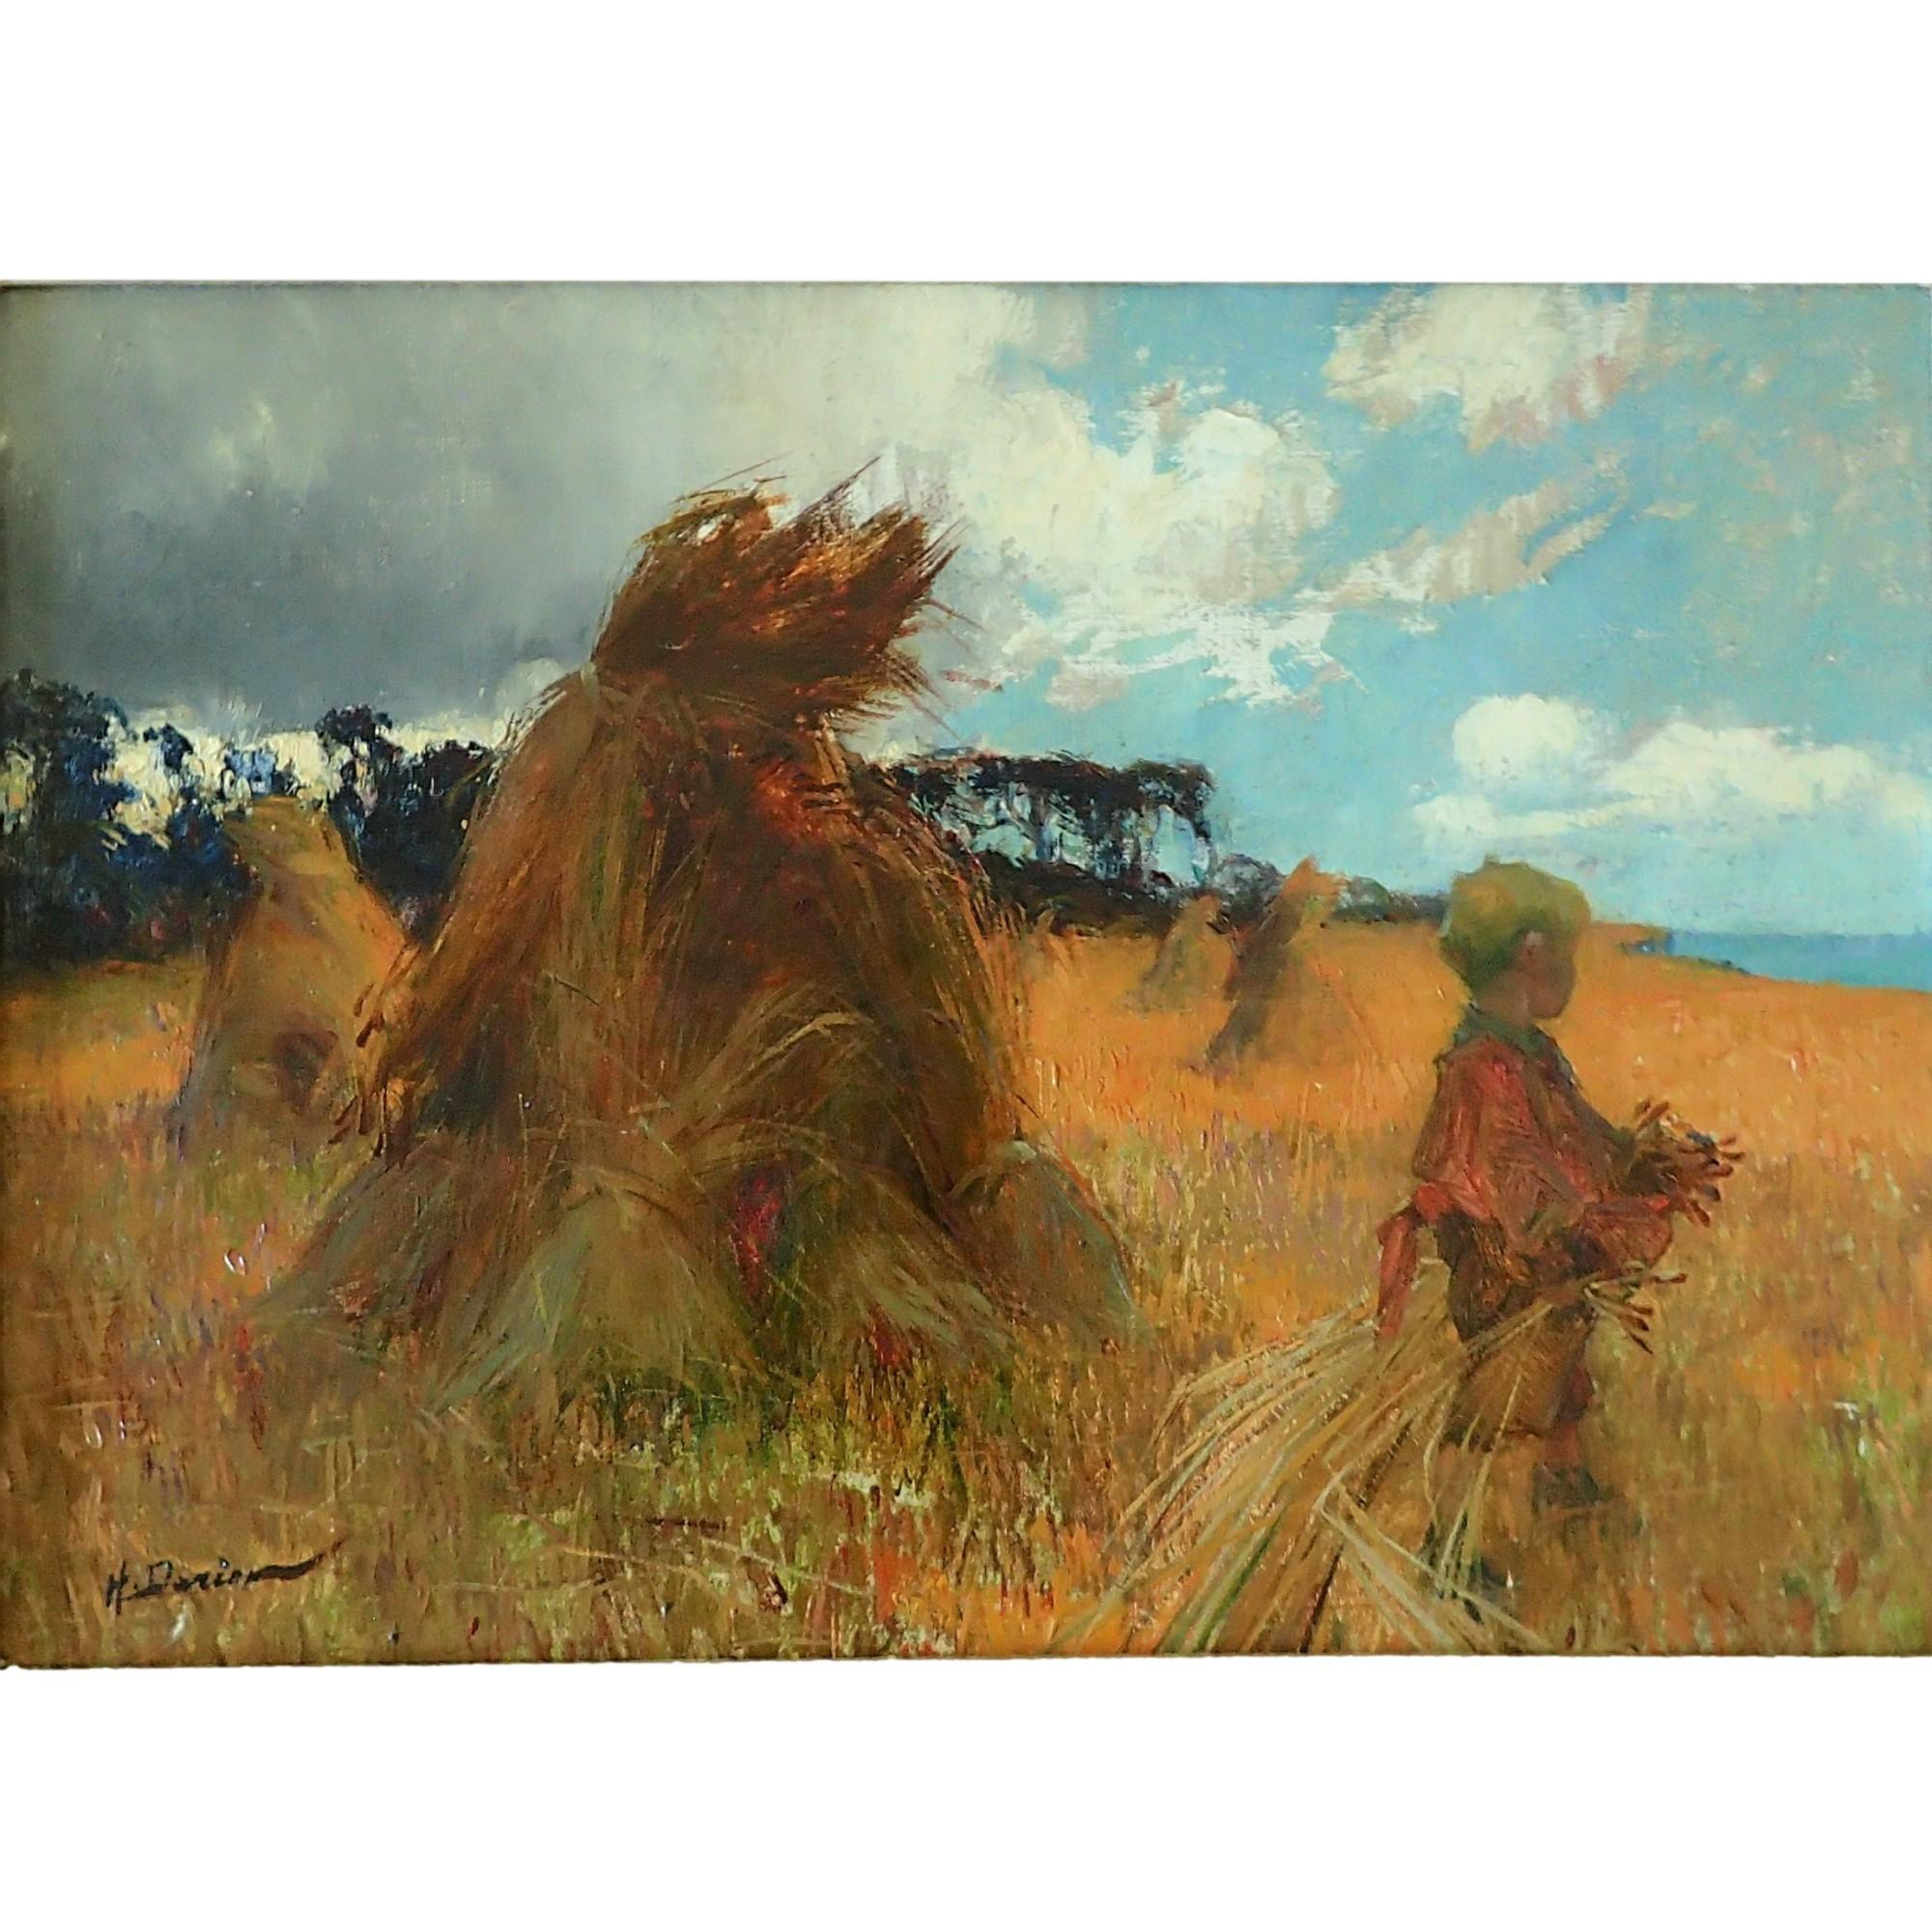 A Beautiful Oil on Canvas Painting Of the Wheat Harvest by Henri Gaston Darien.

Born in Paris in 1864, Henri Gaston DARIEN signed his paintings with the pseudonym DARIEN, an anagram of his real name Adrien.
A student of Jules Lefebvre and Antoine